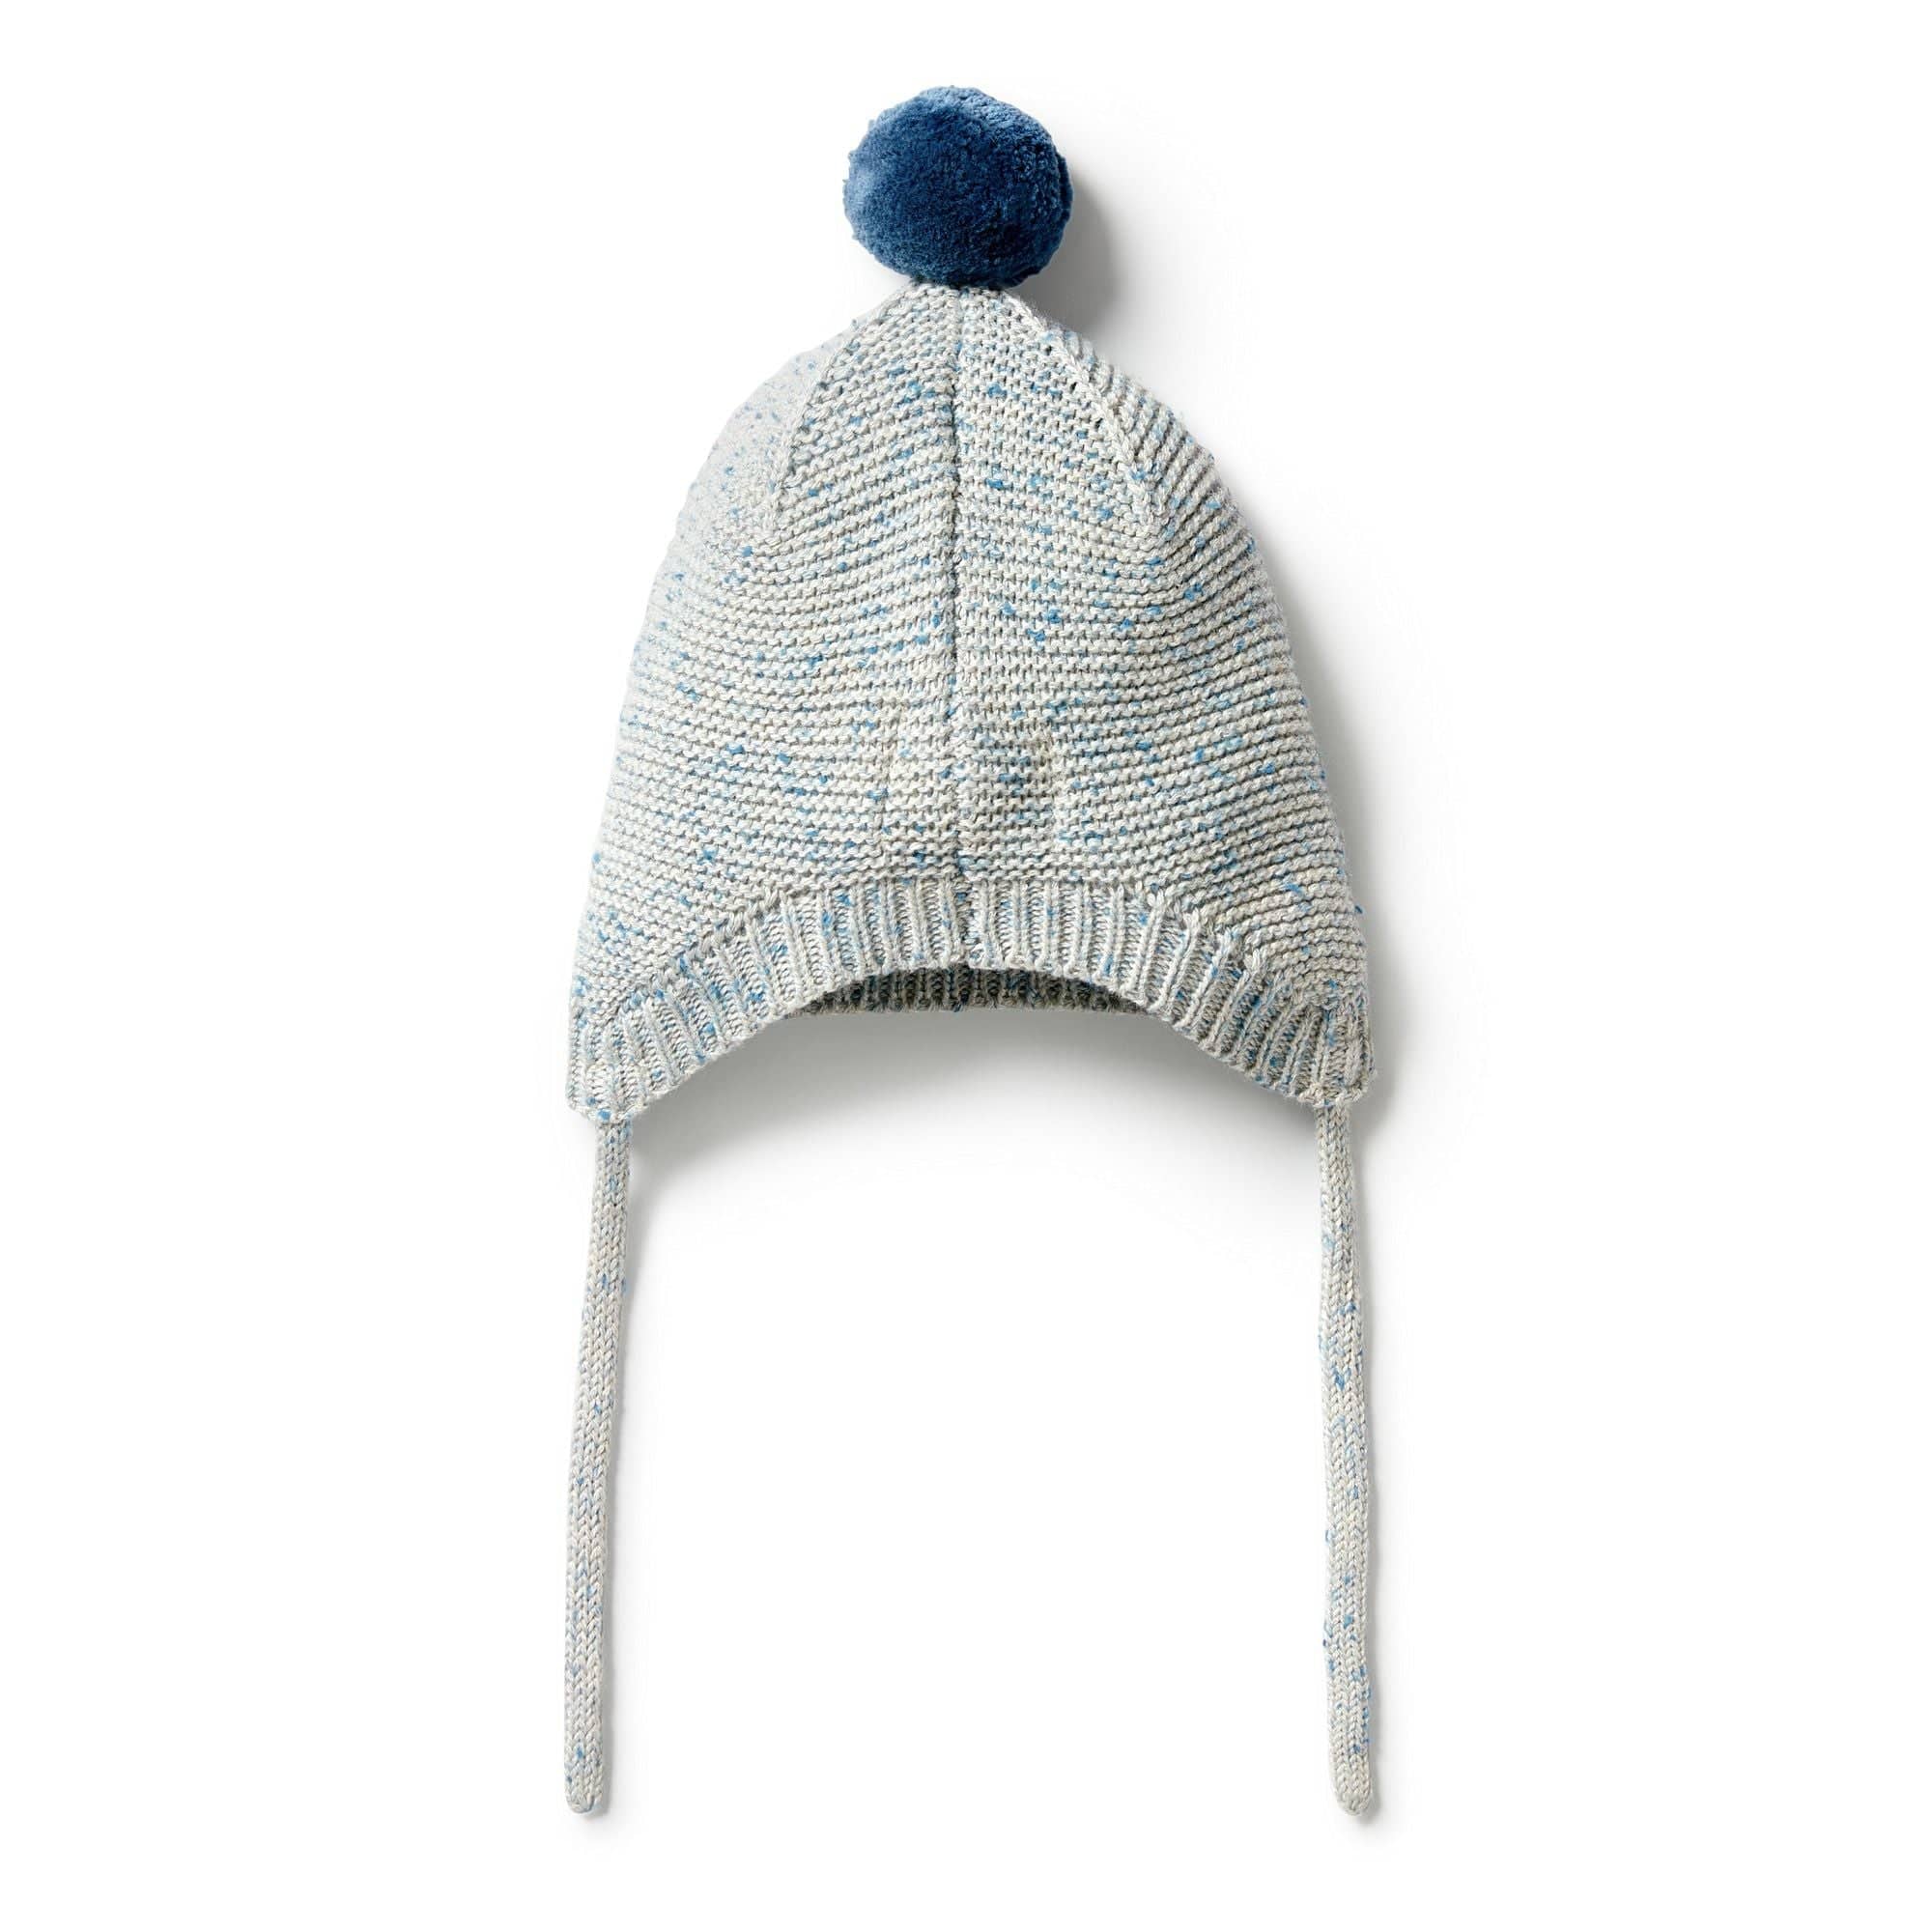 Wilson & Frenchy Accessories Hats Knitted Cable Bonnet - Bluestone Fleck